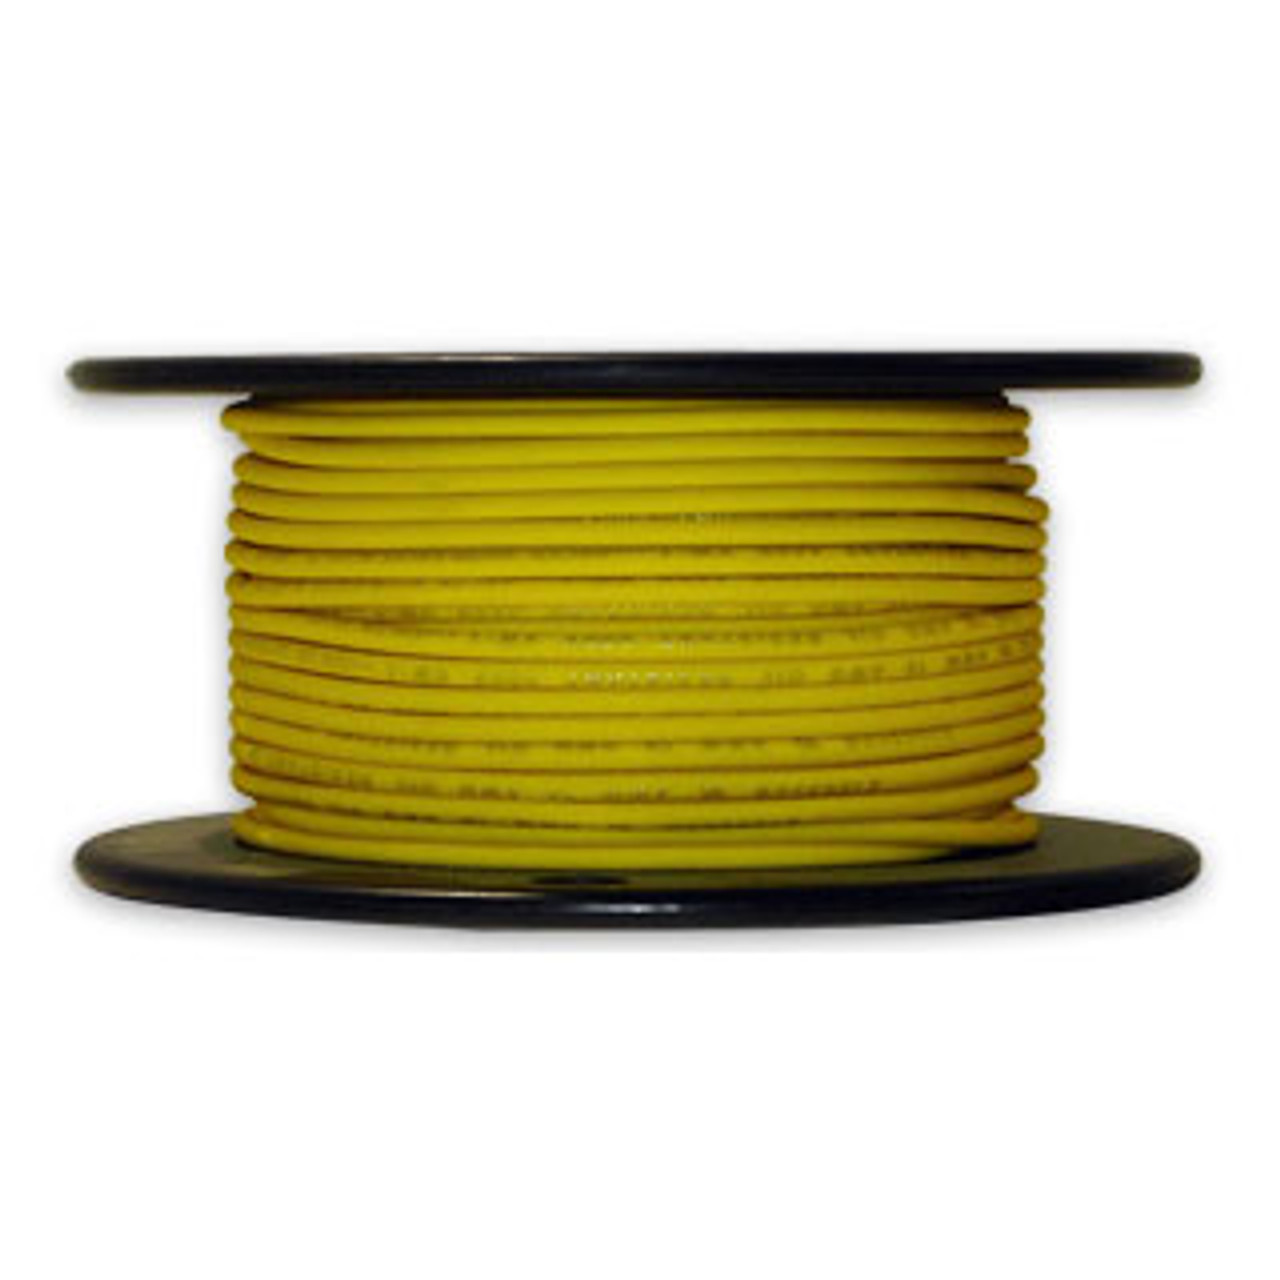 14 Gauge 100 Feet 4 Conductor Tinned Copper Insulation Wire